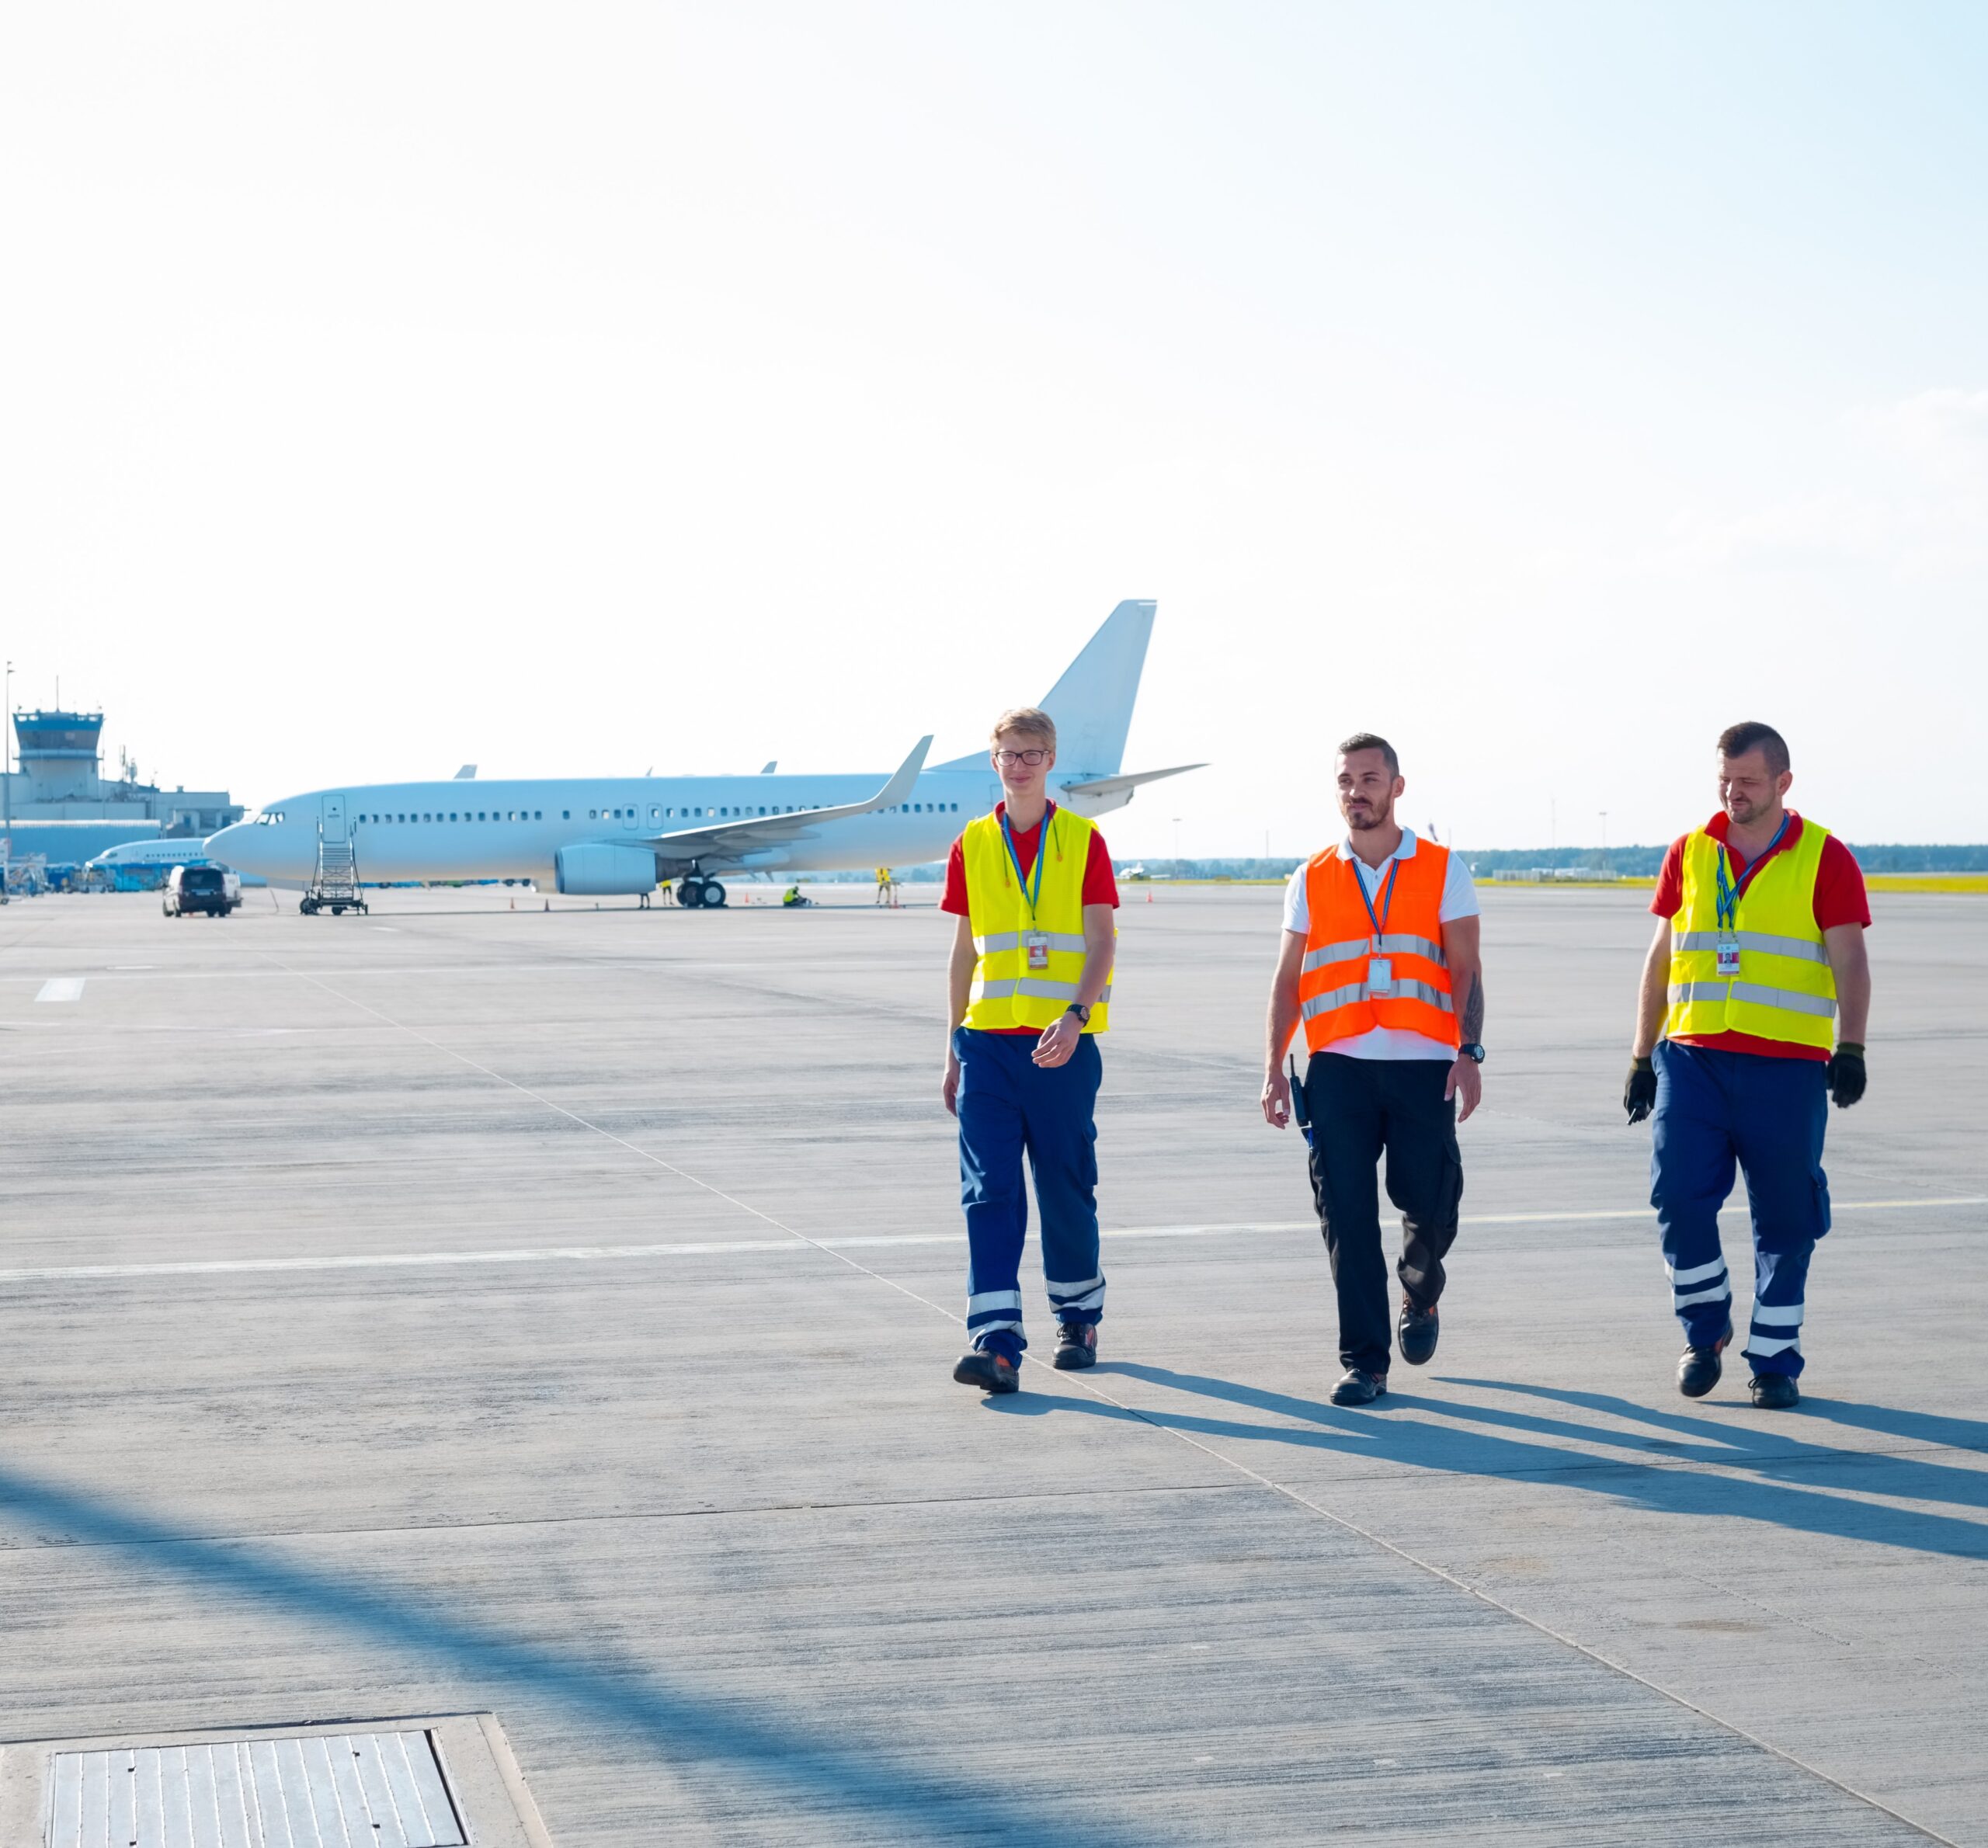 Helping a European airport ensure a safe and healthy workplace